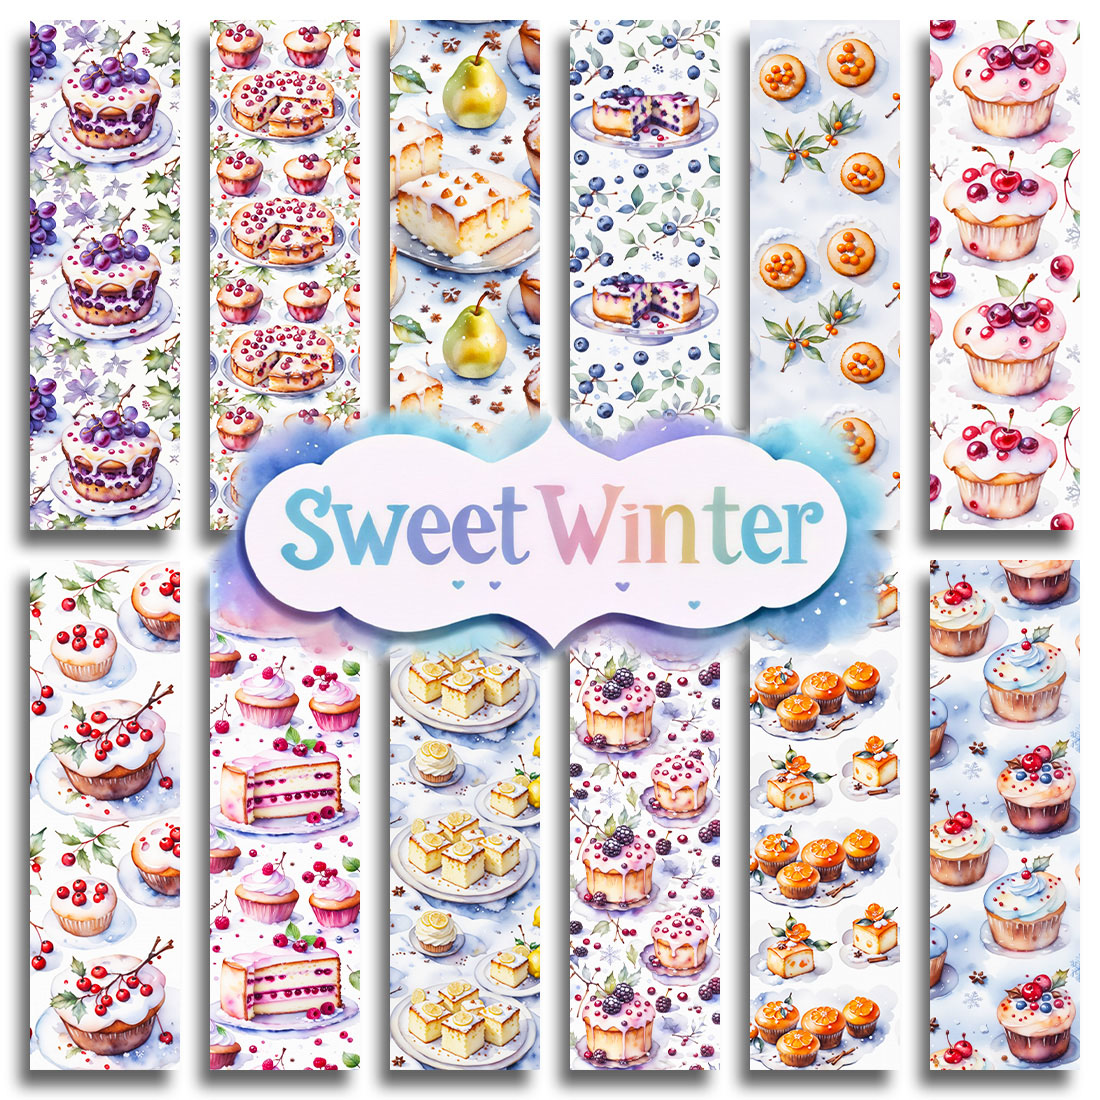 Sweet Winter: Seamless Digital Patterns cover image.